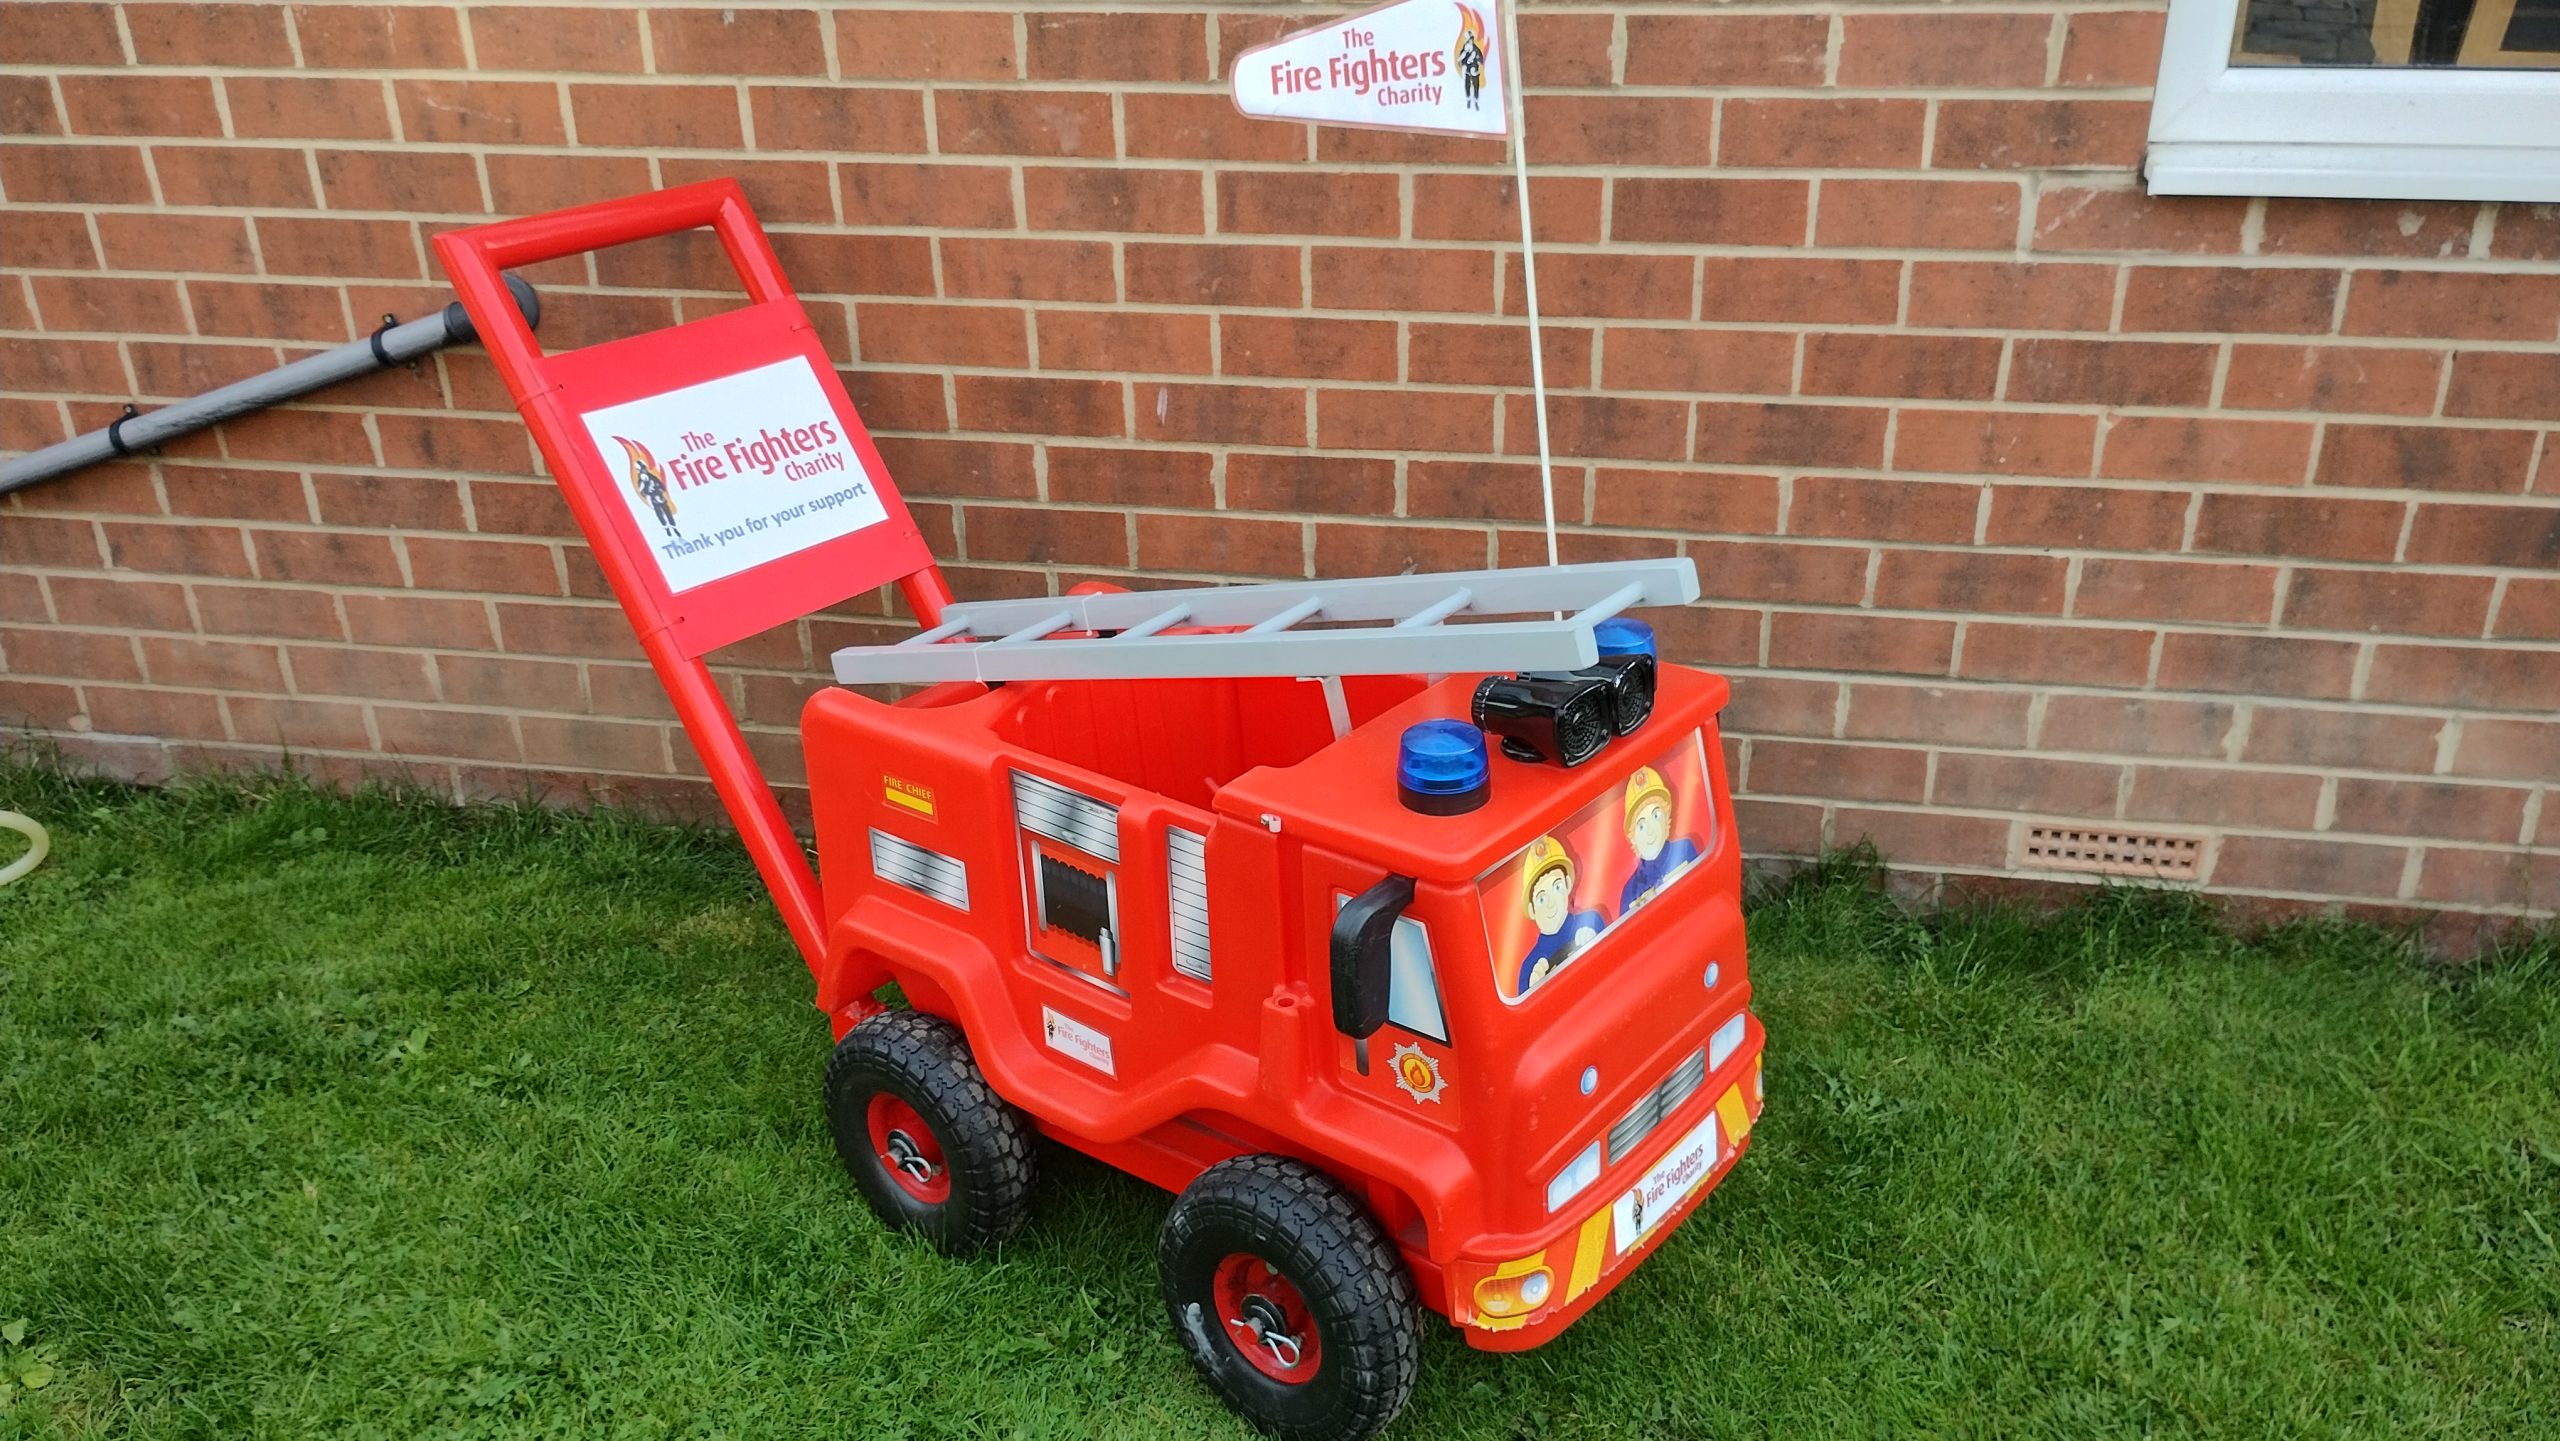 Gavin and the team will push this mini fire engine round